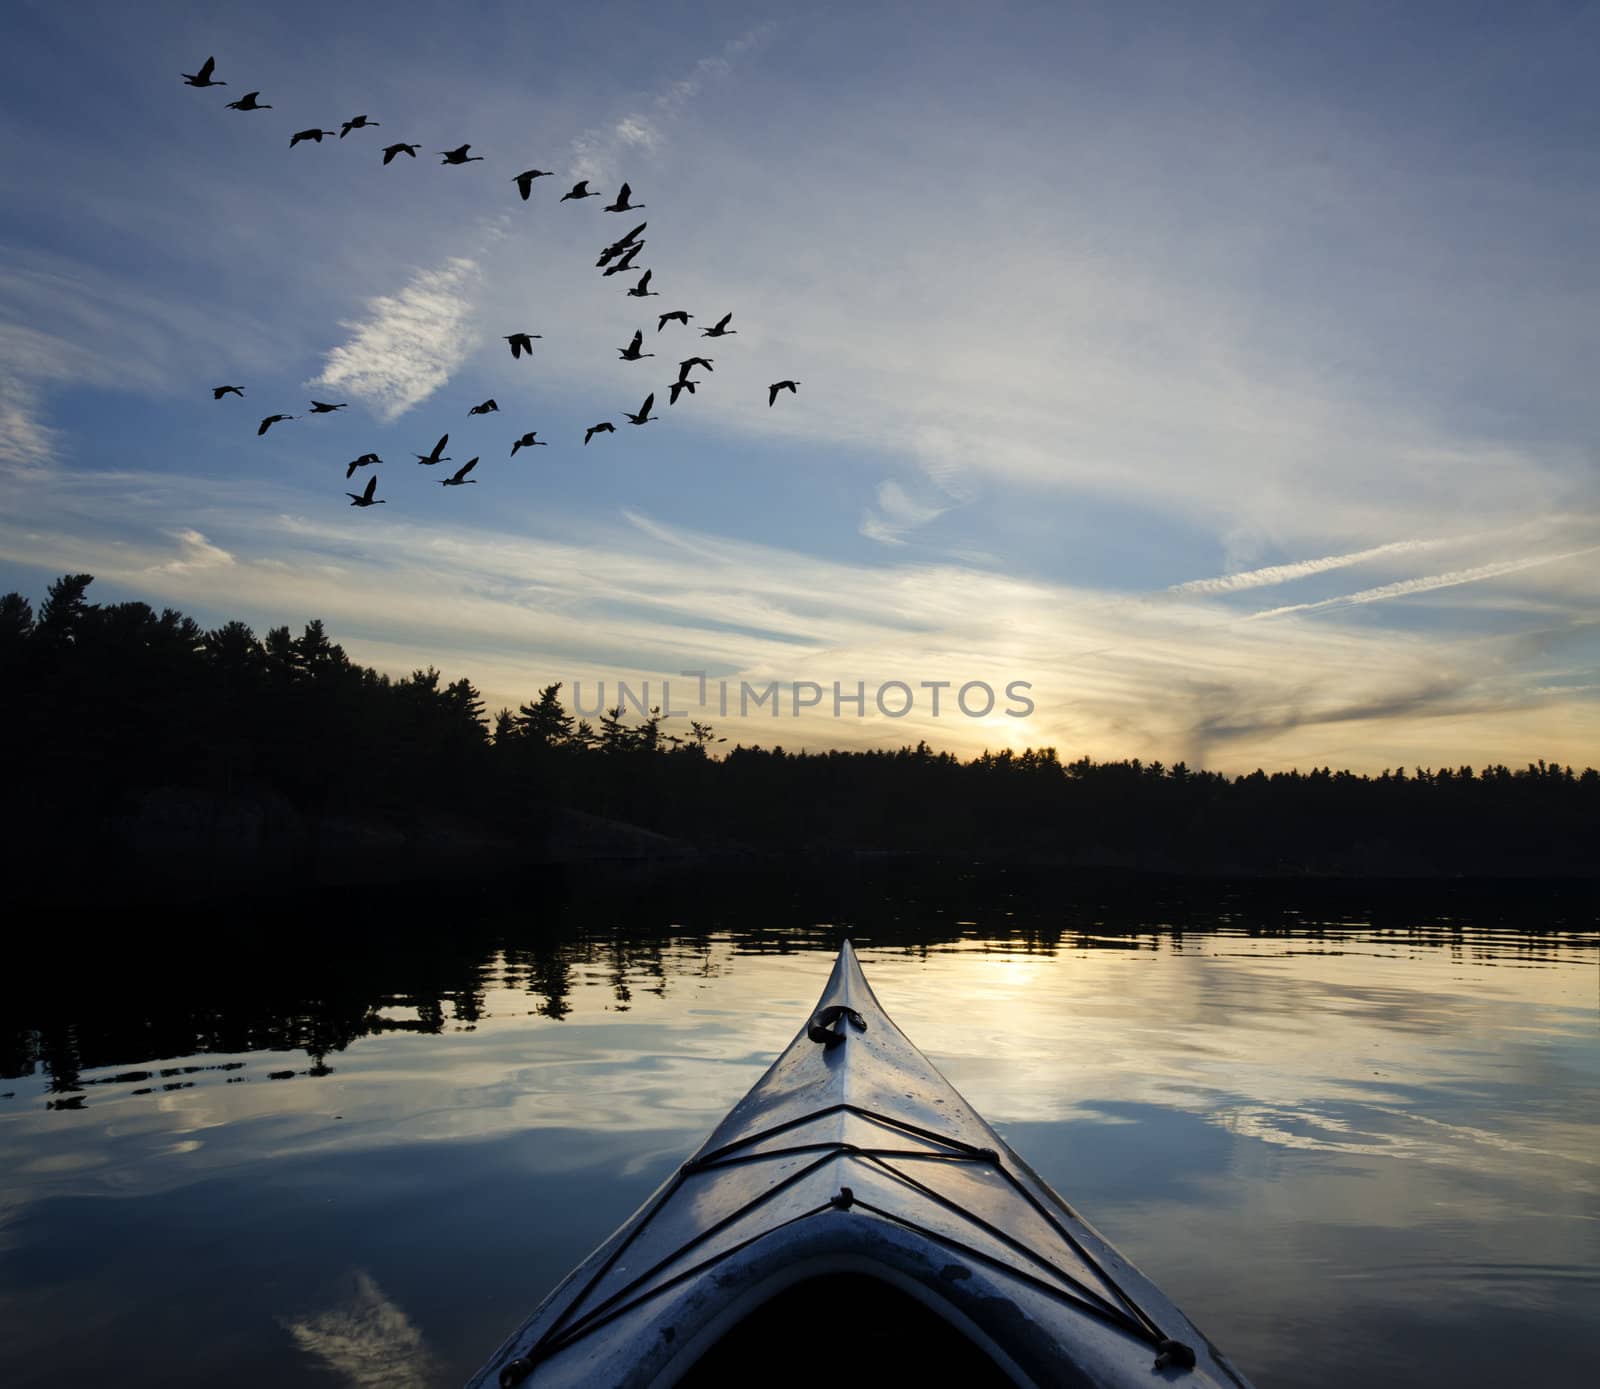 Kayak and Geese at Sunset by Gordo25